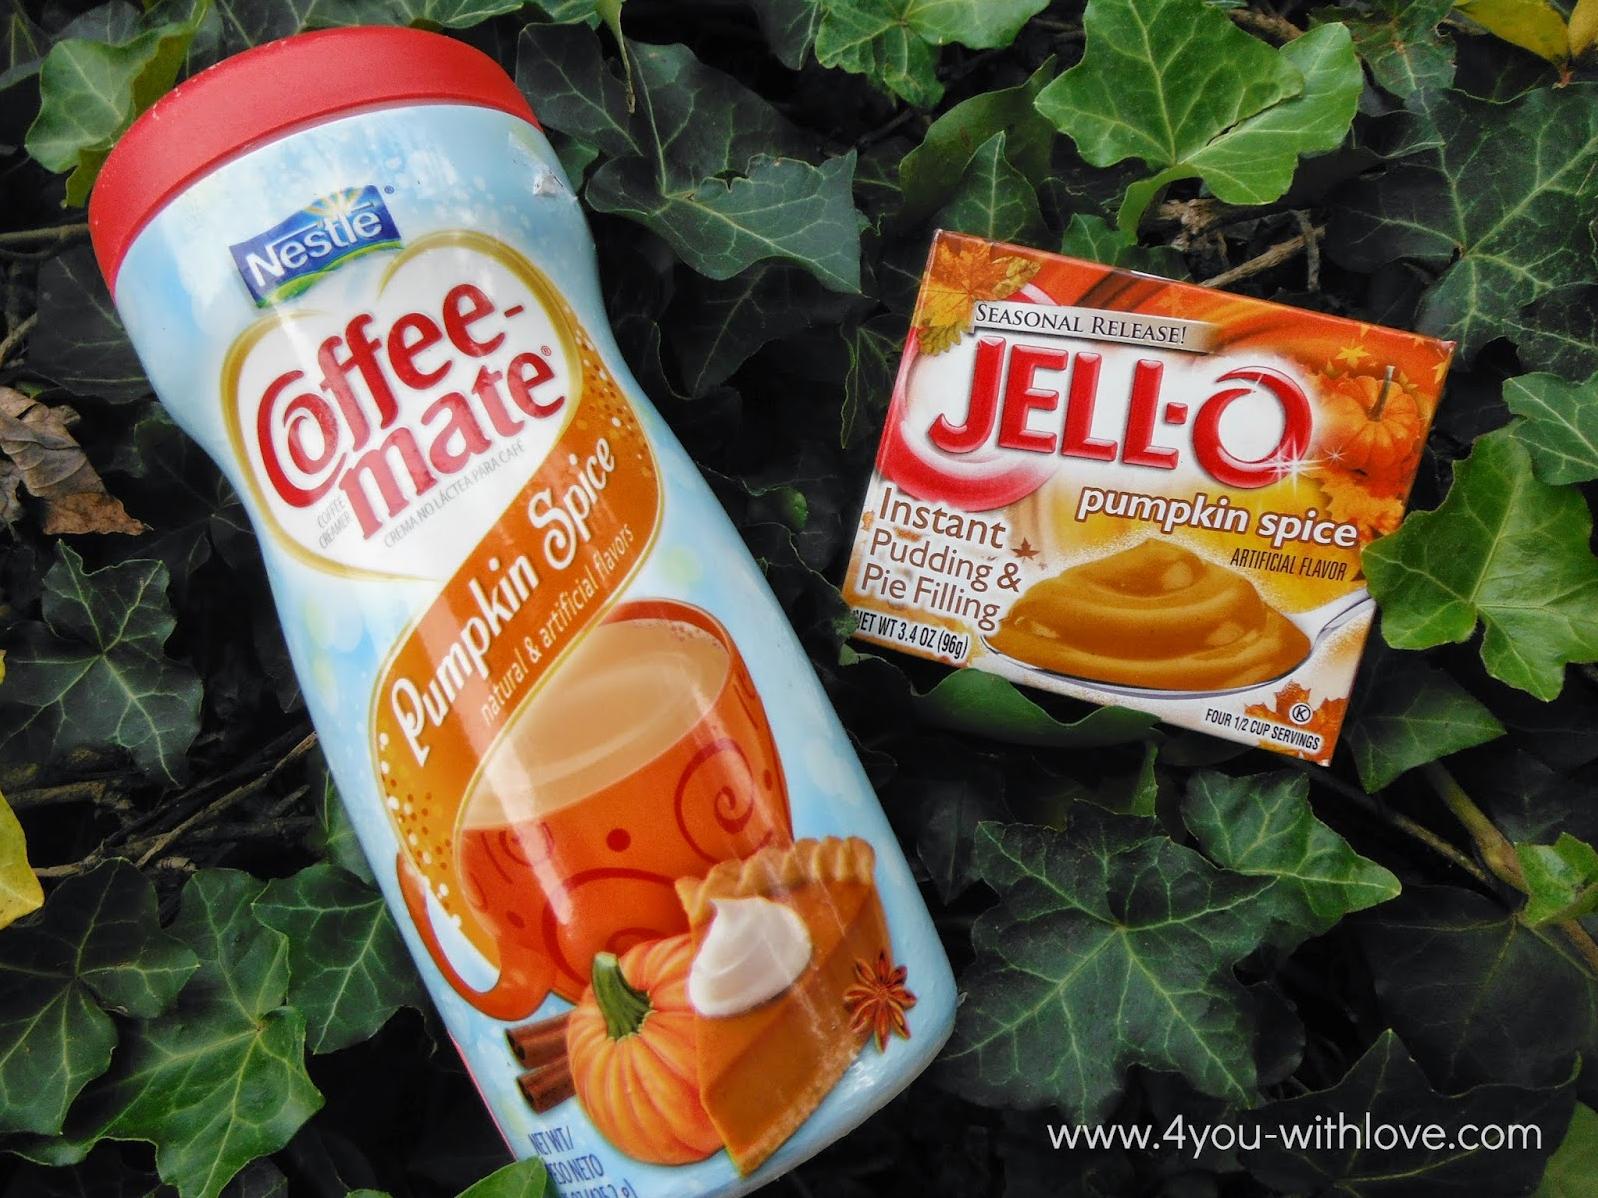  This heavenly sip will satisfy your cravings for pumpkin pie and coffee in one fell swoop.